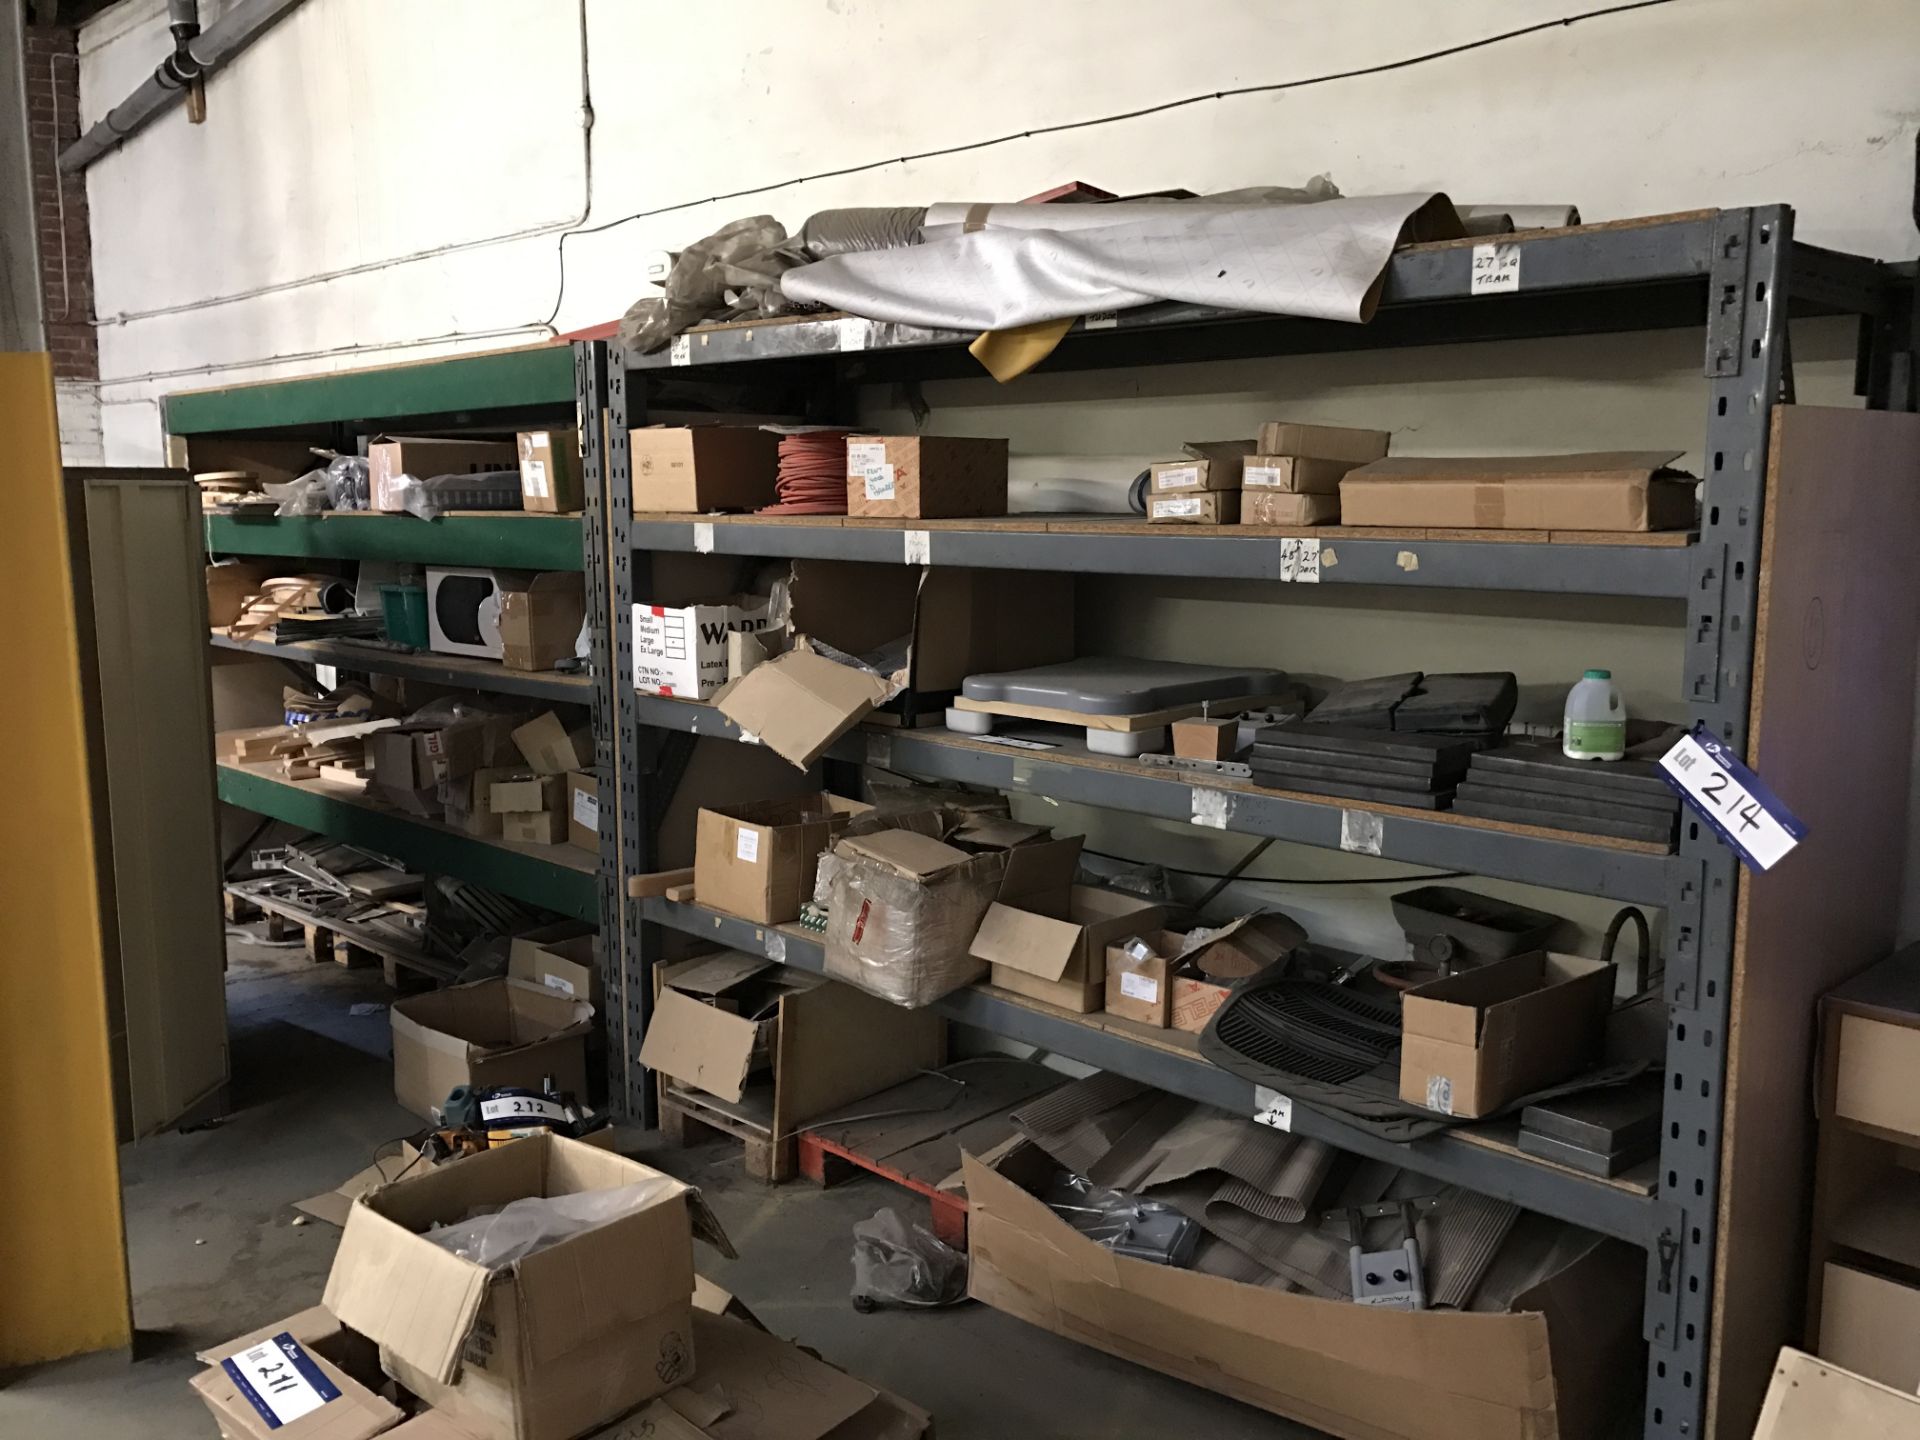 Contents of Two Bays of Racking including Edgband, Wheels, Batons, etc